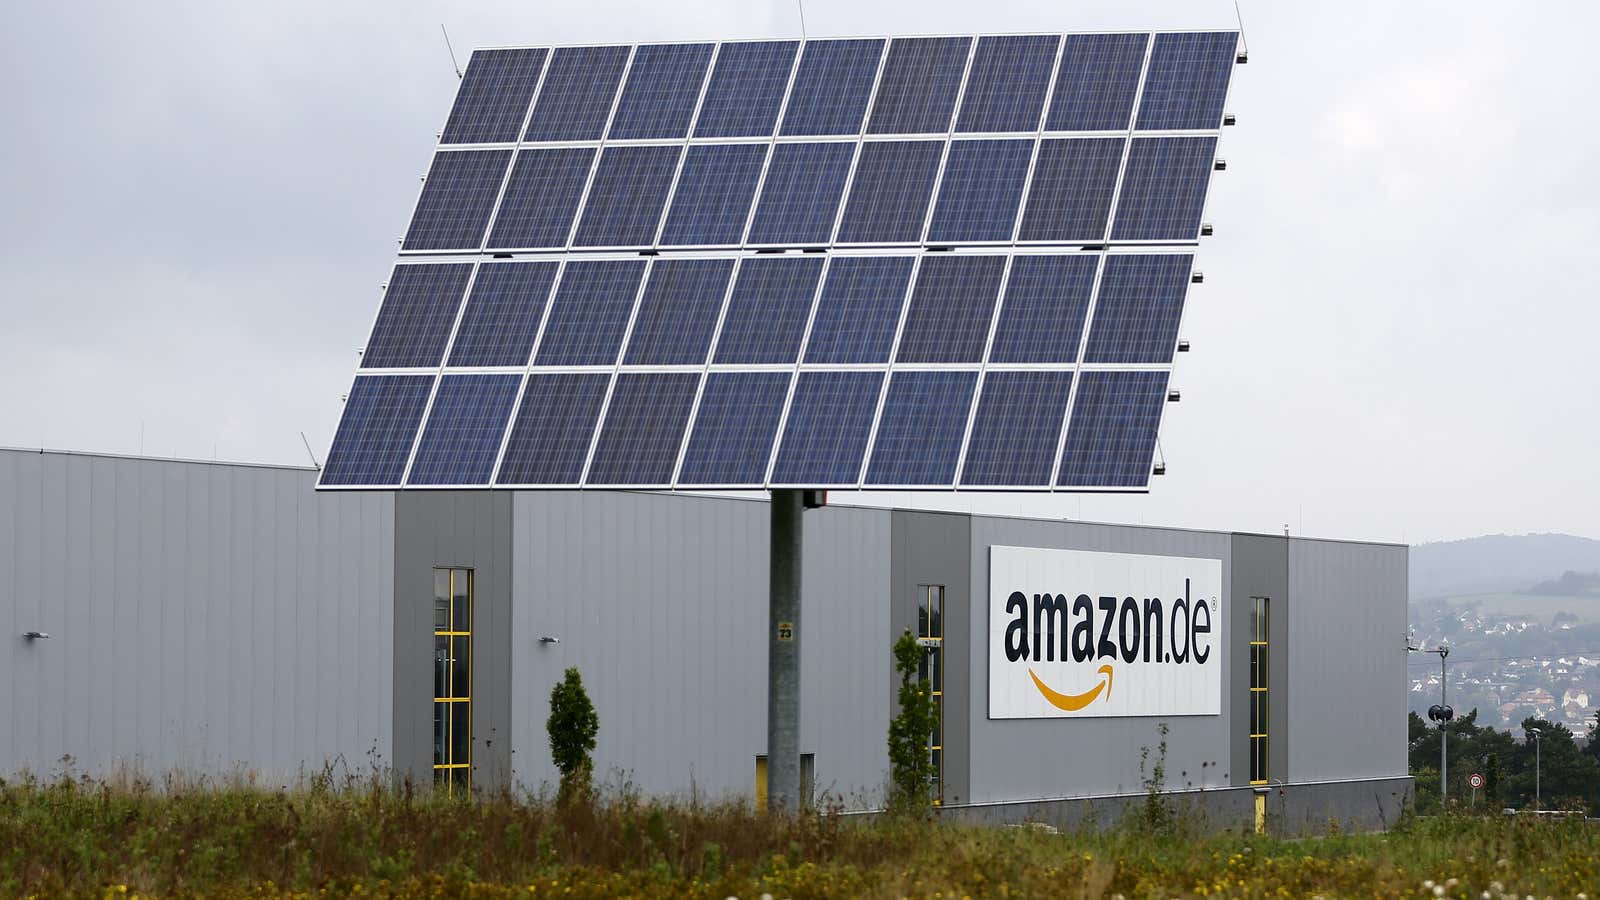 Photovoltaic solar panels in front of the Amazon distribution centre in Bad Hersfeld in Germany.